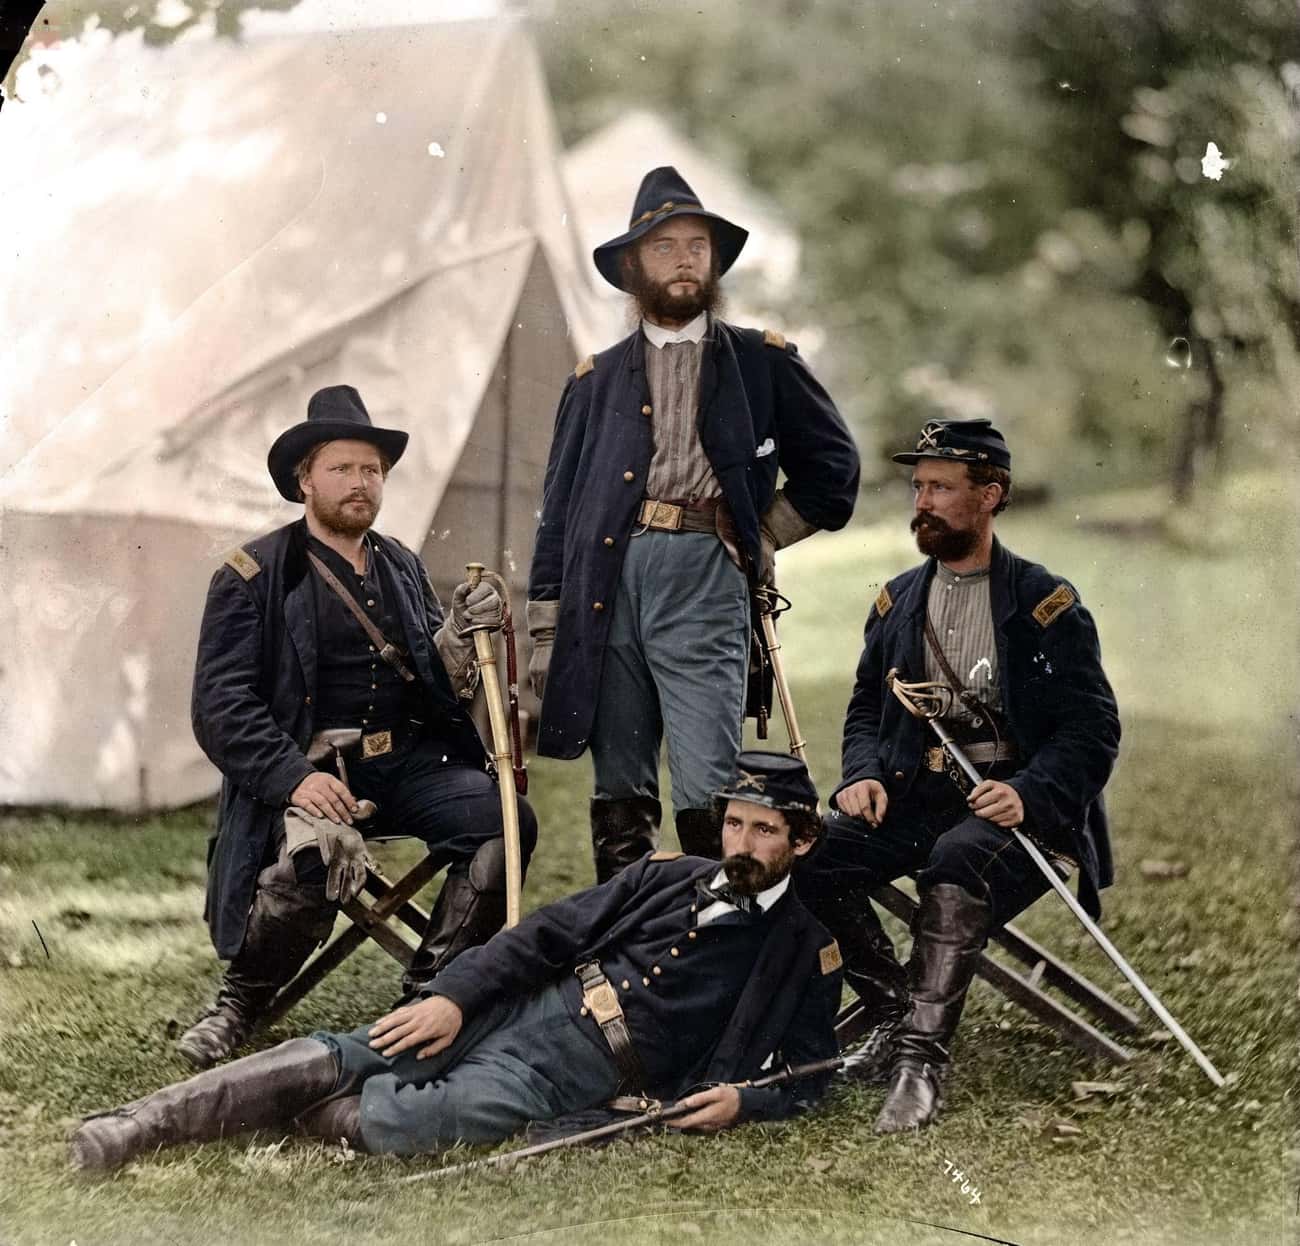 Union Officers, Westover Landing, August 1862